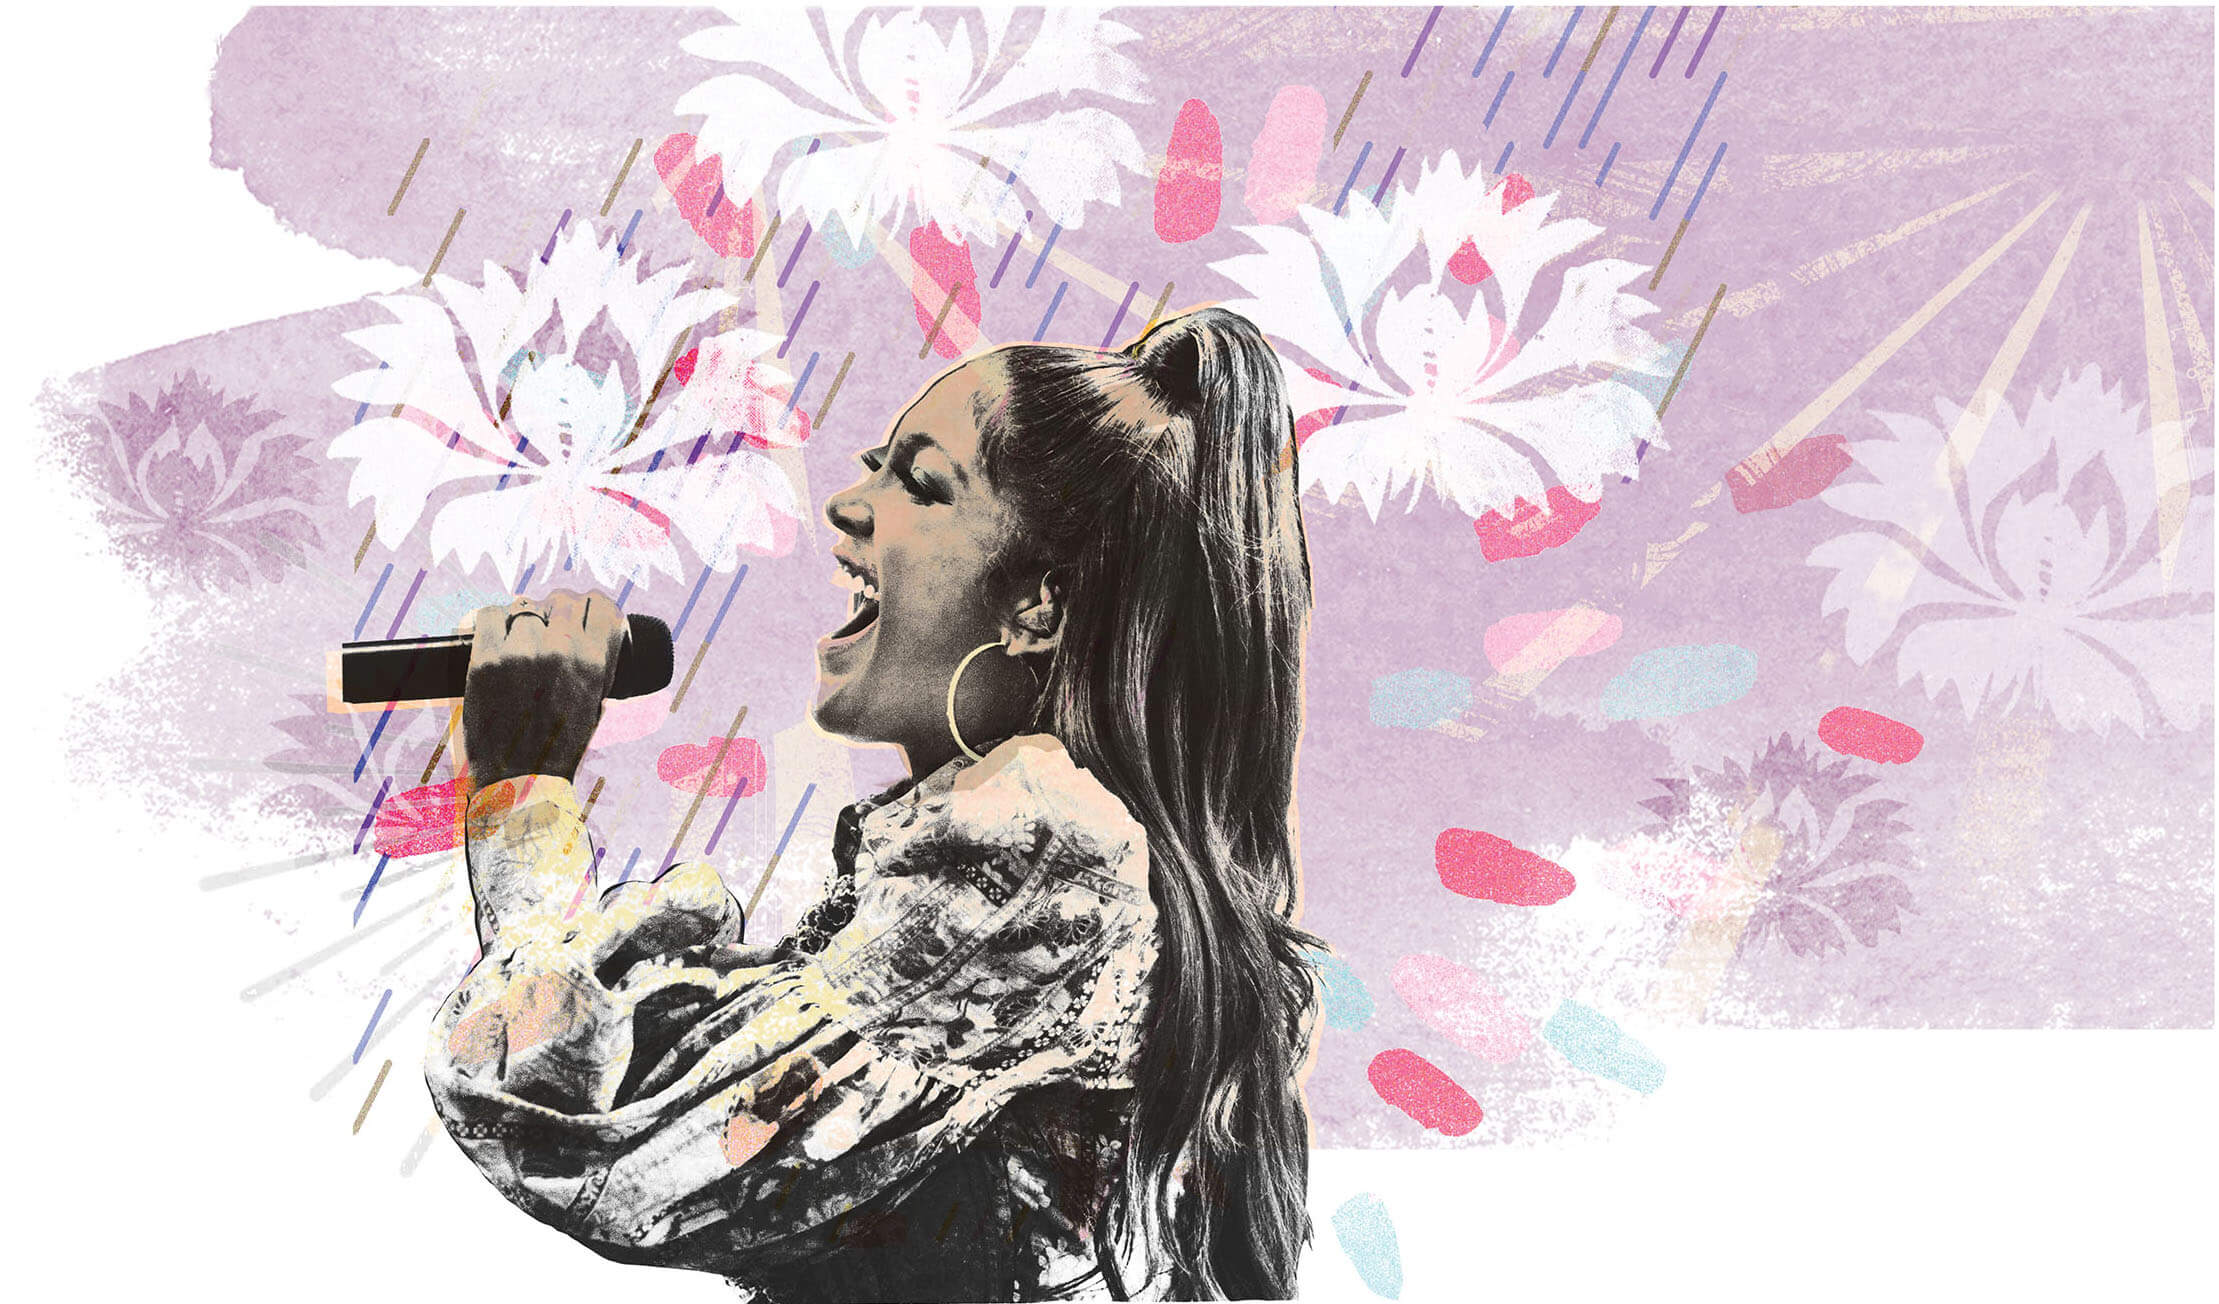 An illustration of a woman with a ponytail singing into a microphone on a purple background